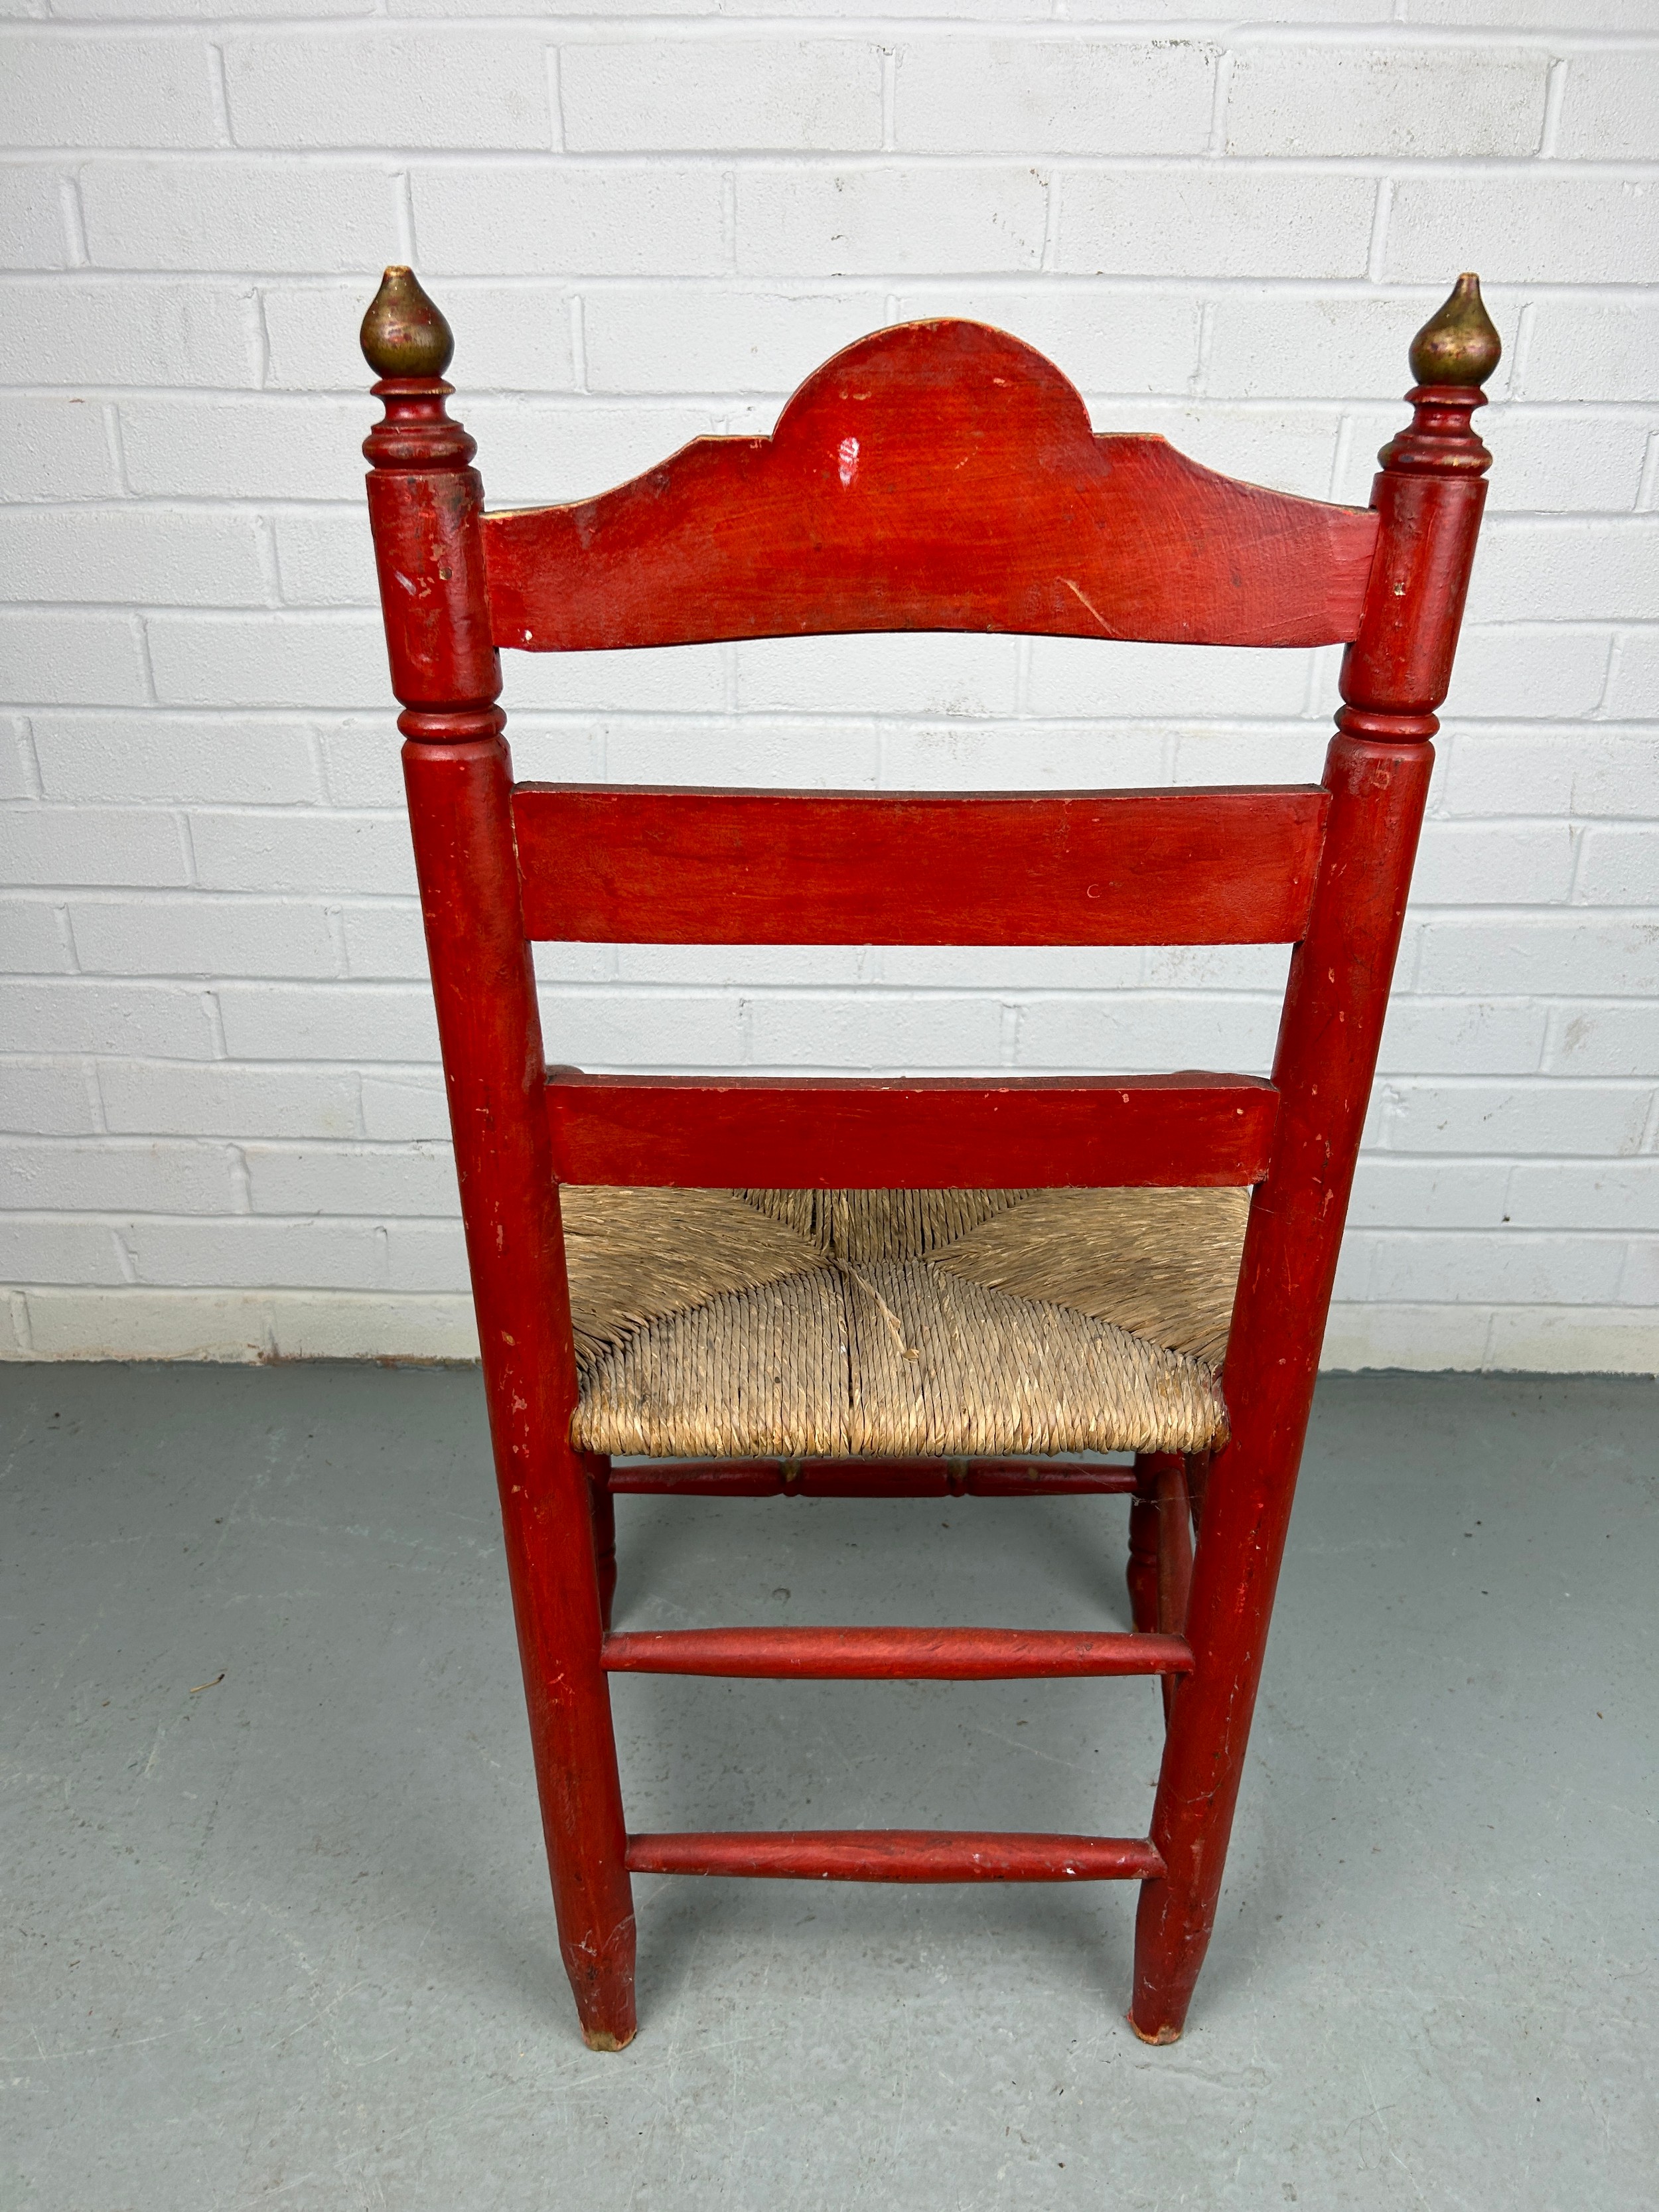 A RED SPANISH CHAIR WITH RUSH SEAT PAINTED WITH SCENE OF A MATADOR, 90cm x 40cm x 35cm - Image 5 of 5